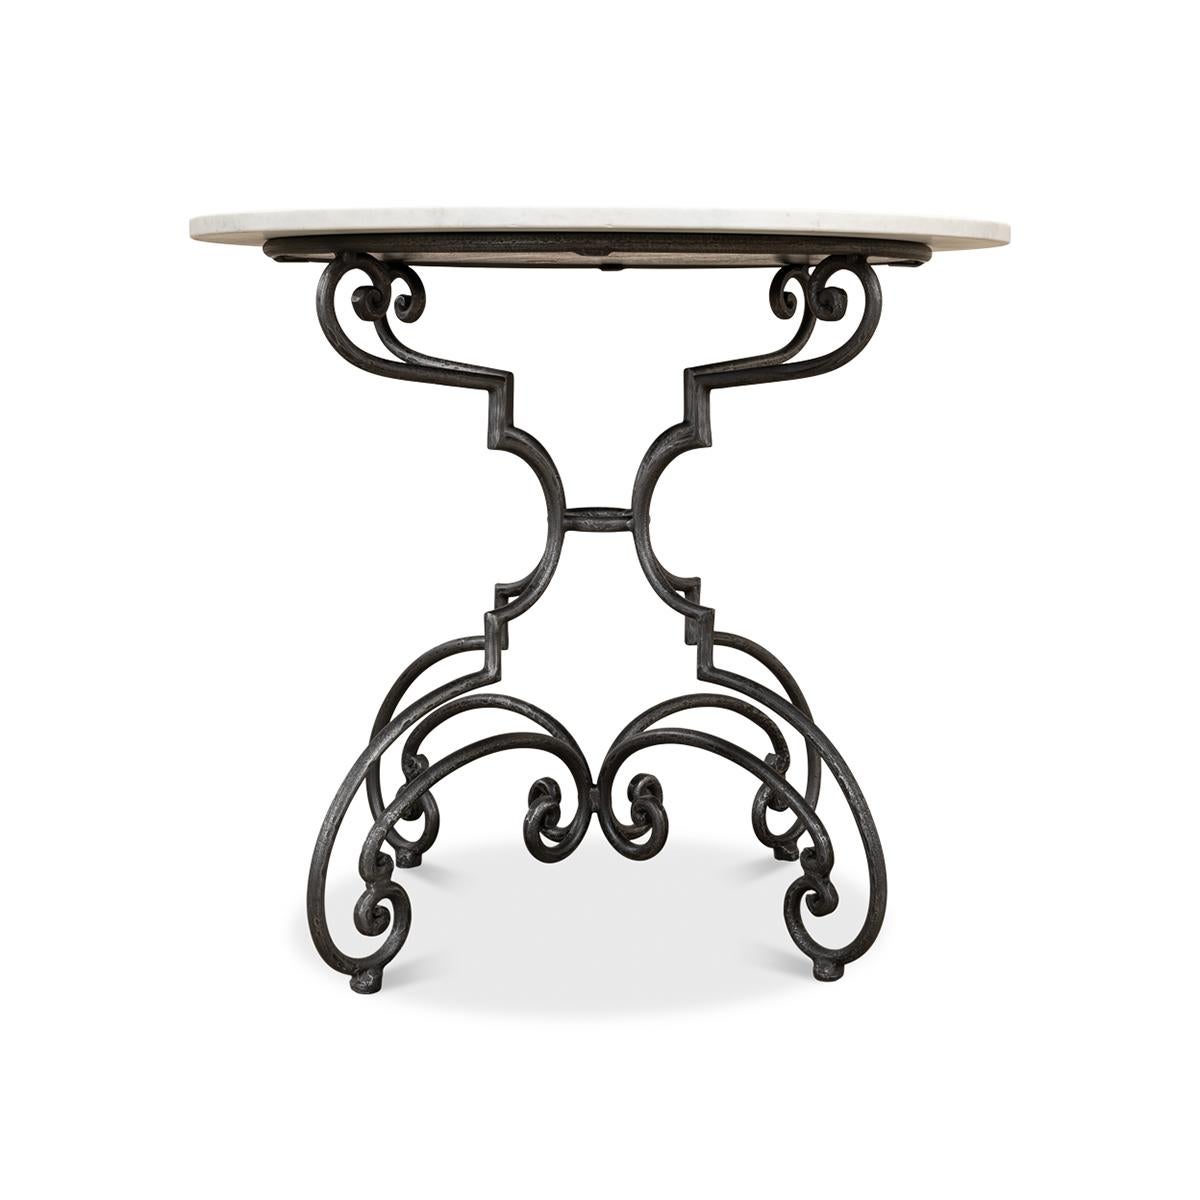 Contemporary French Marble Top Brasserie Table For Sale